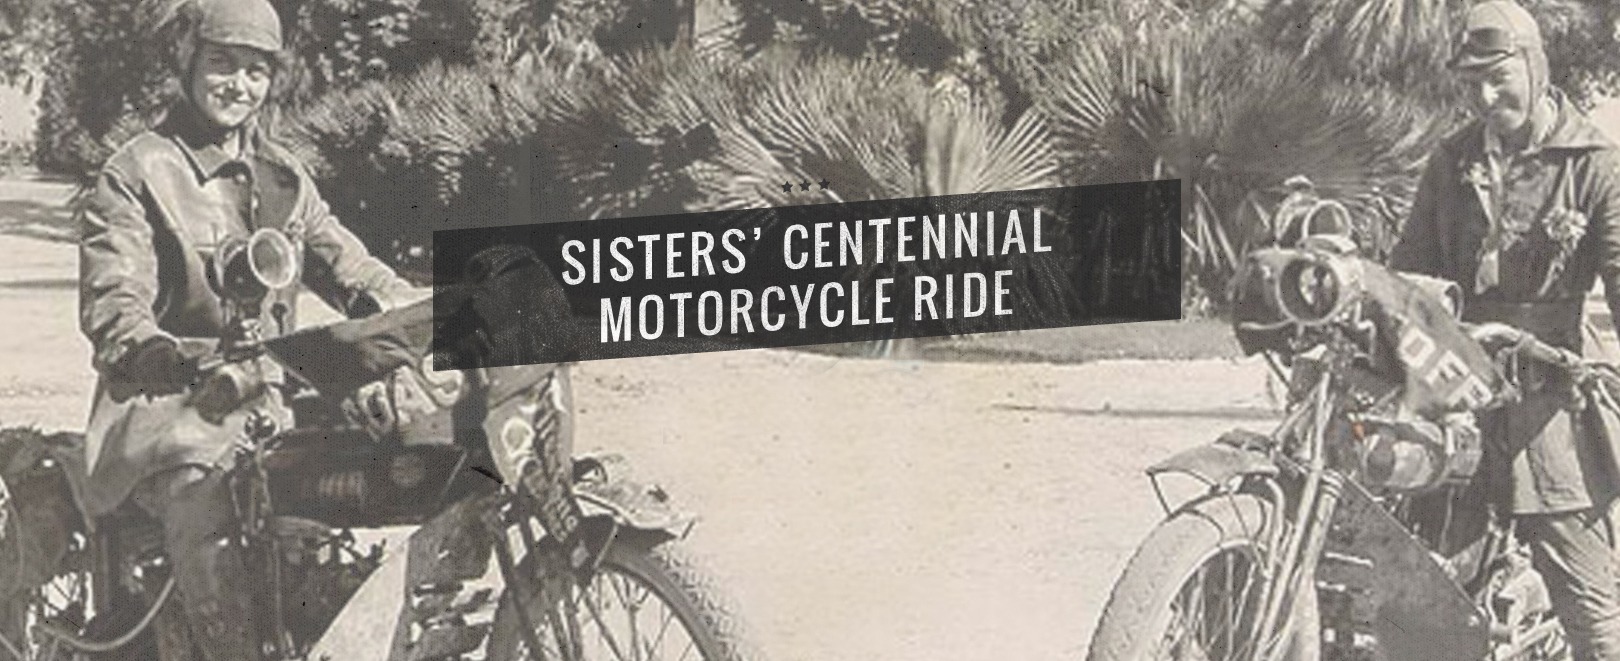 Sisters' Centennial Motorcycle Ride